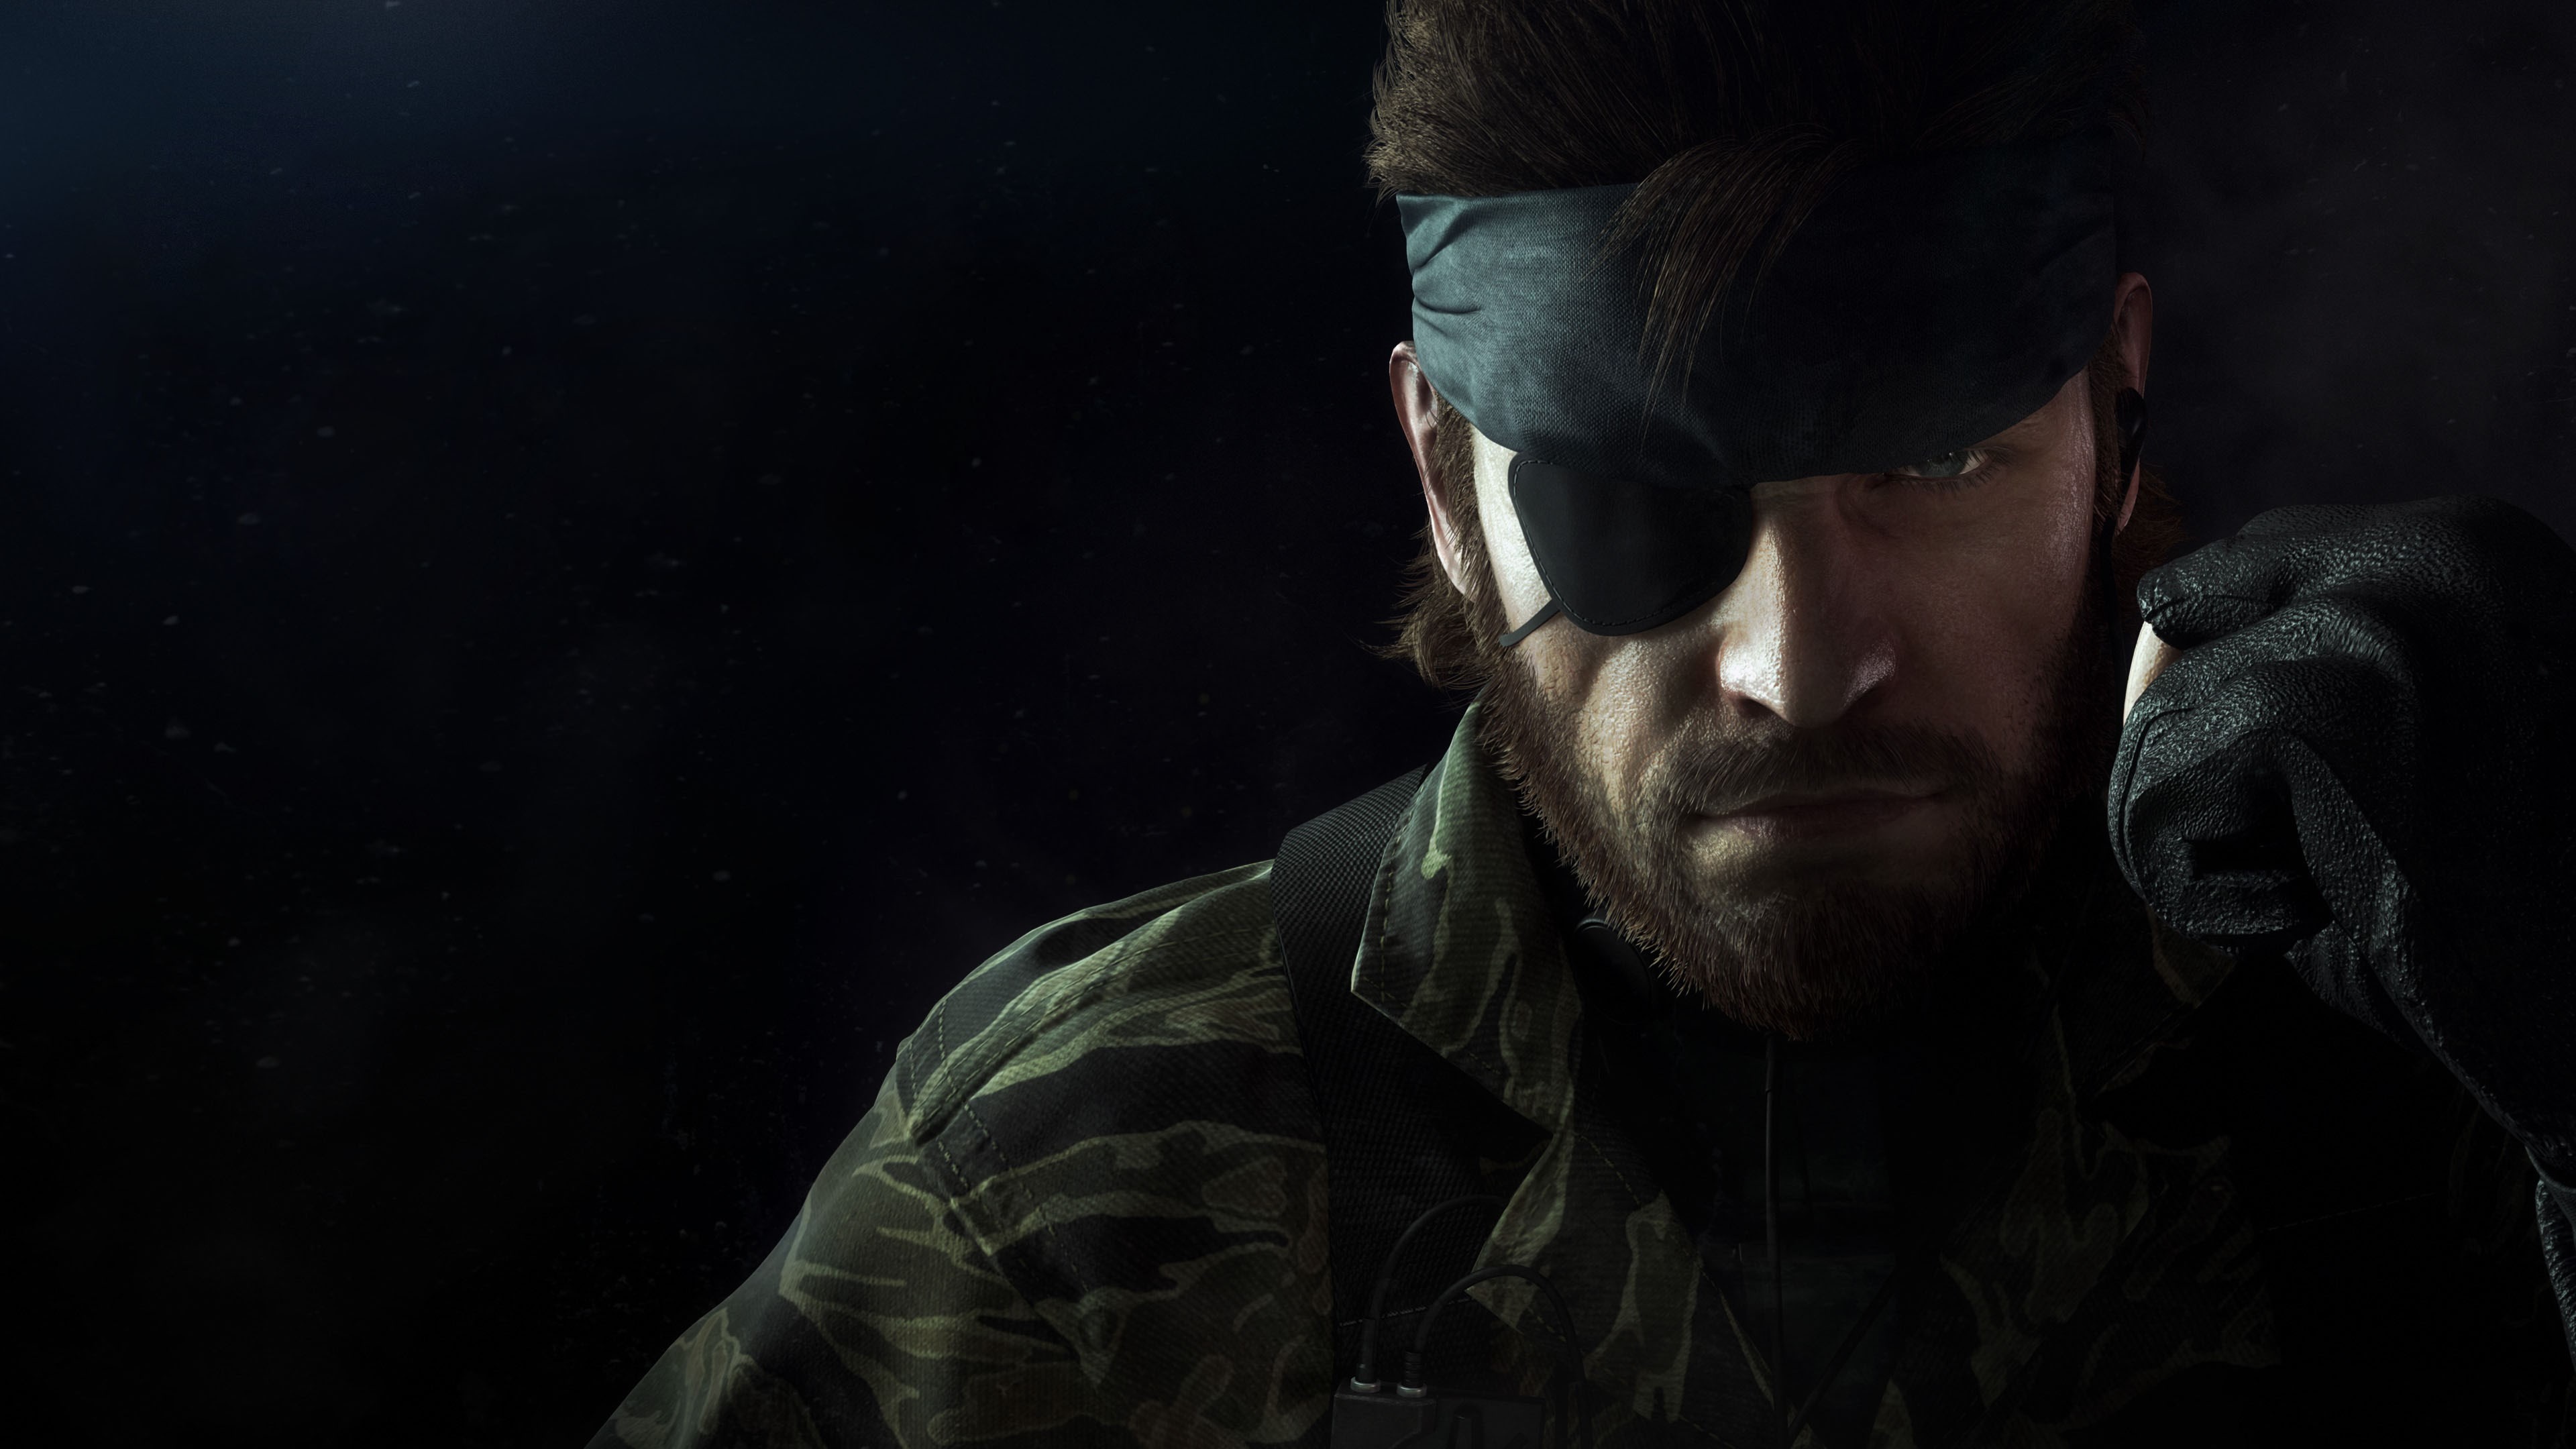 3840x2160 Images for Desktop: metal gear solid 3 snake eater picture, 586 kB -  Commodore